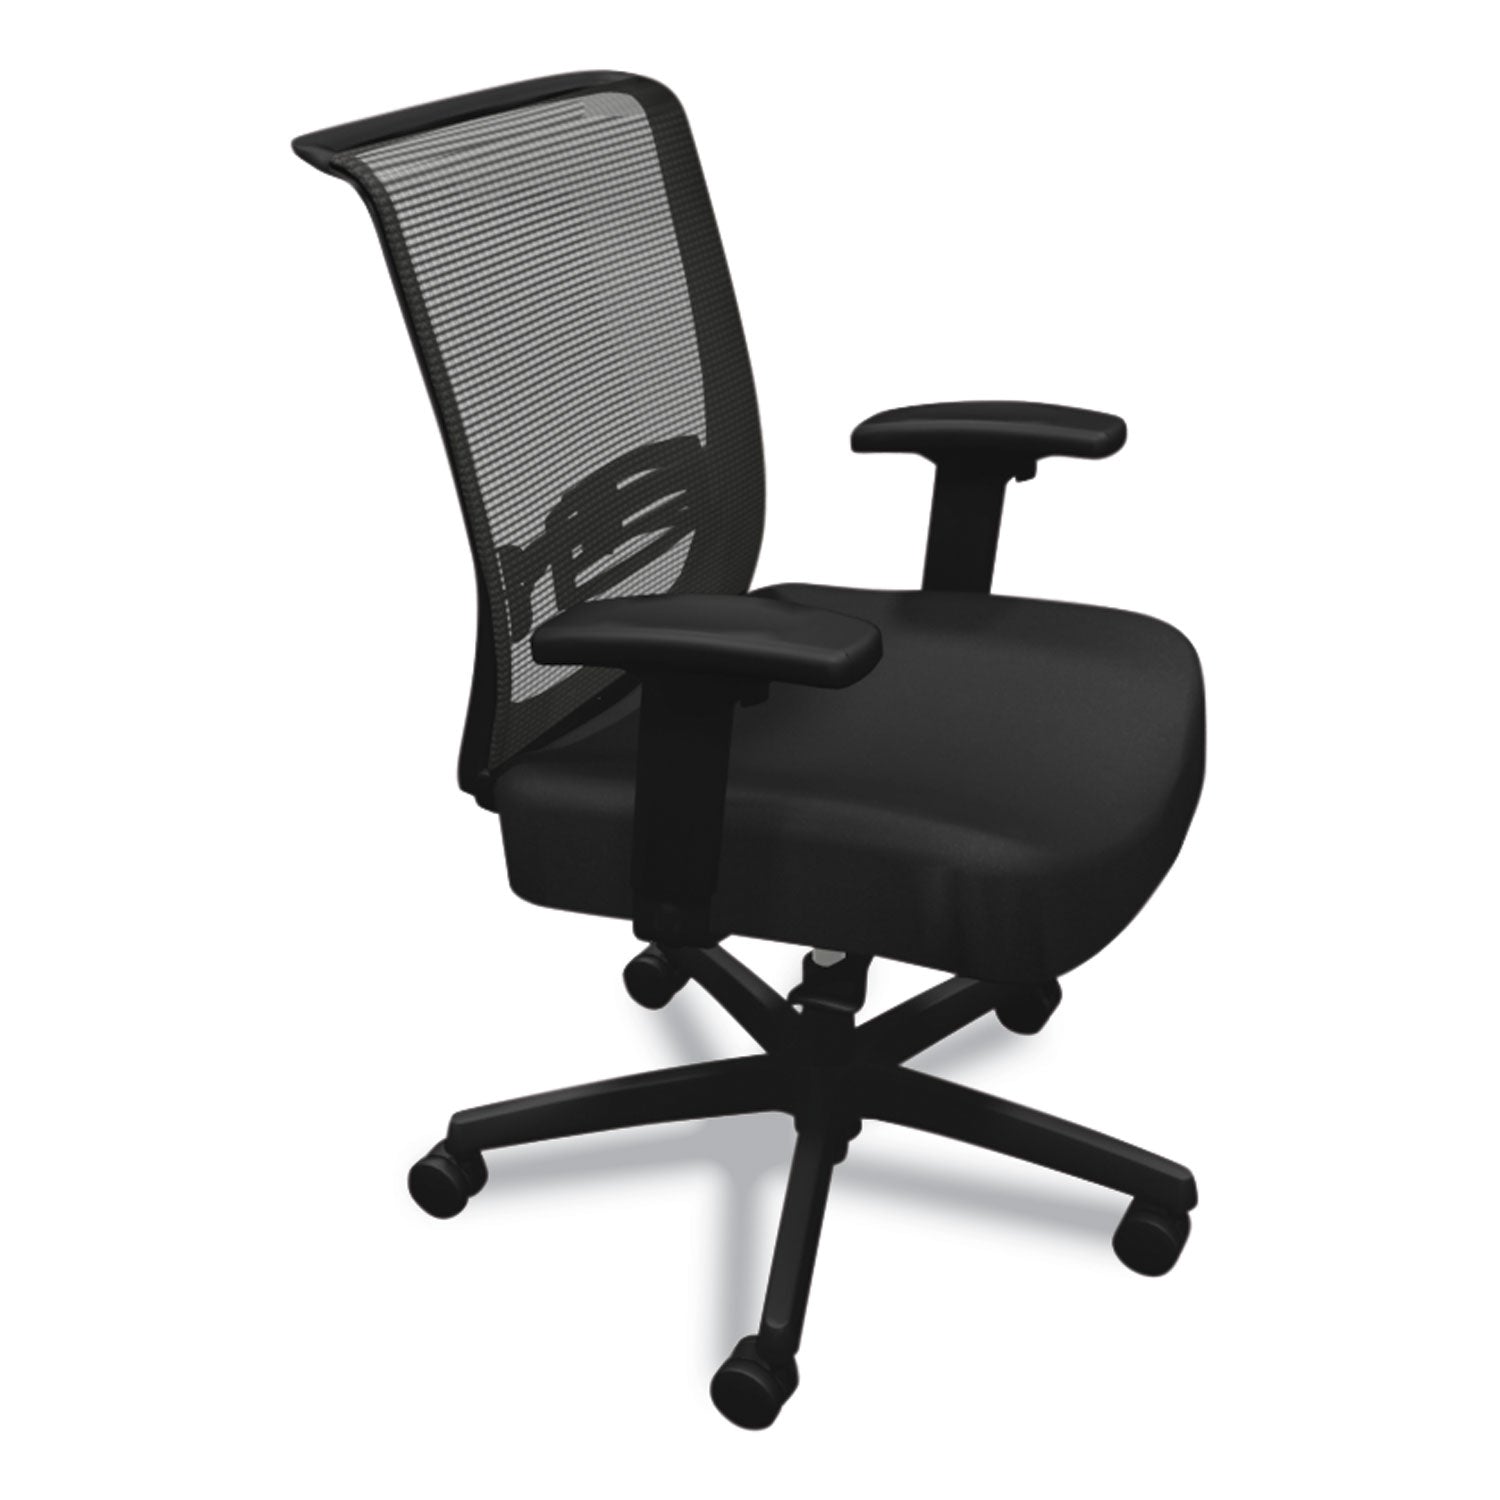 convergence-mid-back-task-chair-swivel-tilt-supports-up-to-275-lb-1575-to-2013-seat-height-black_honcms1aaccf10 - 3